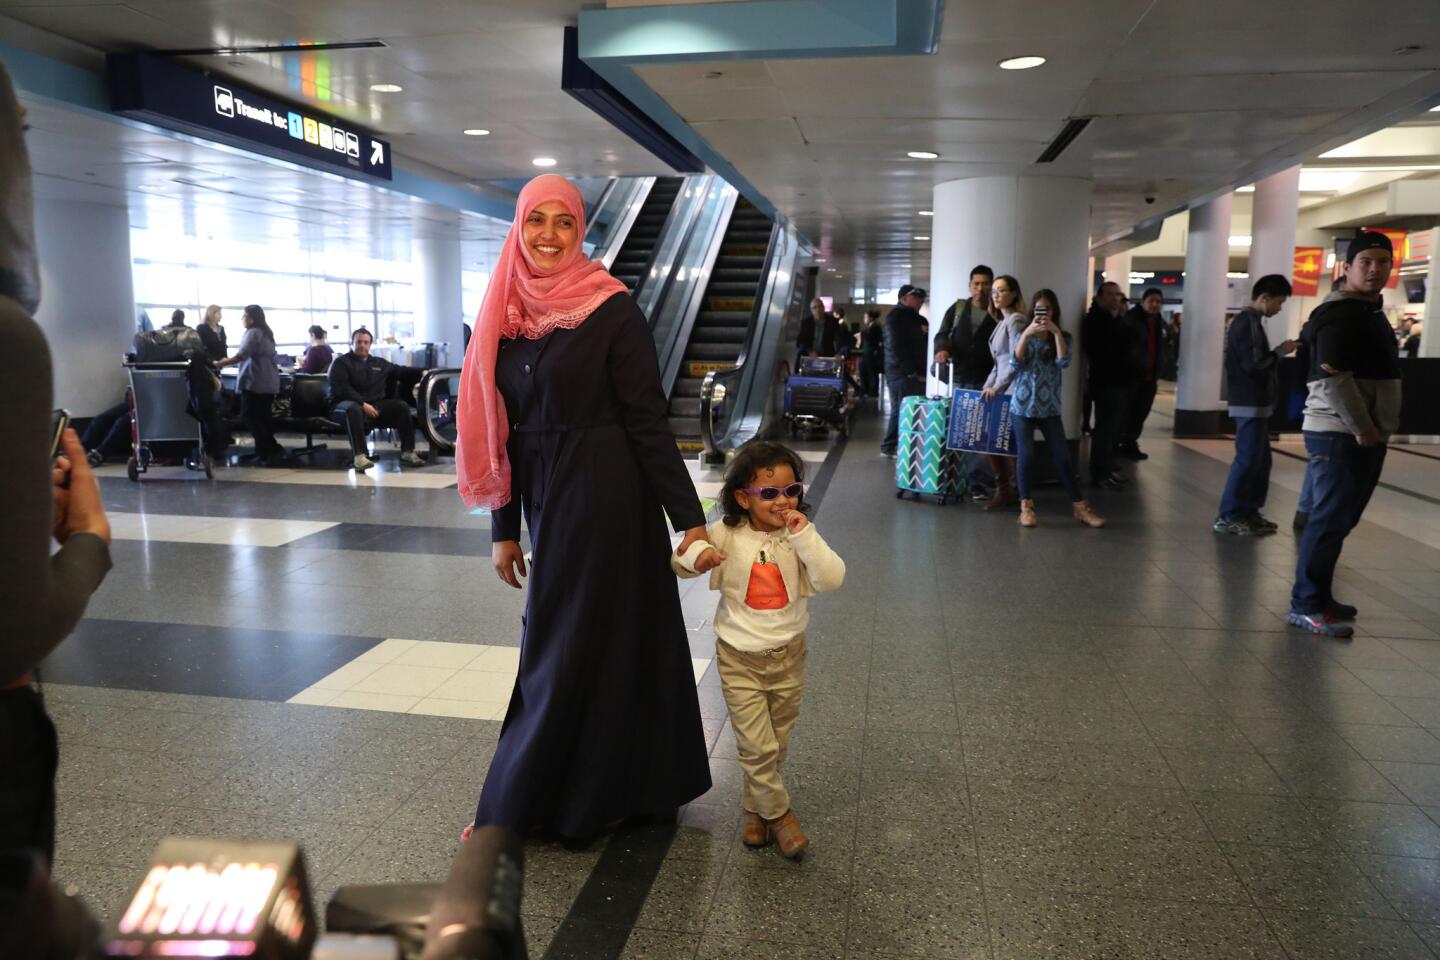 Haifa Abdulwahab Hussein Mohammed, of Yemen, and her daughter, Rudaynah Jemal, 3, walk through O'Hare International Airport on Feb. 5, 2017. The two had been set to arrive the previous Saturday but were delayed because of President Donald Trump's travel ban.